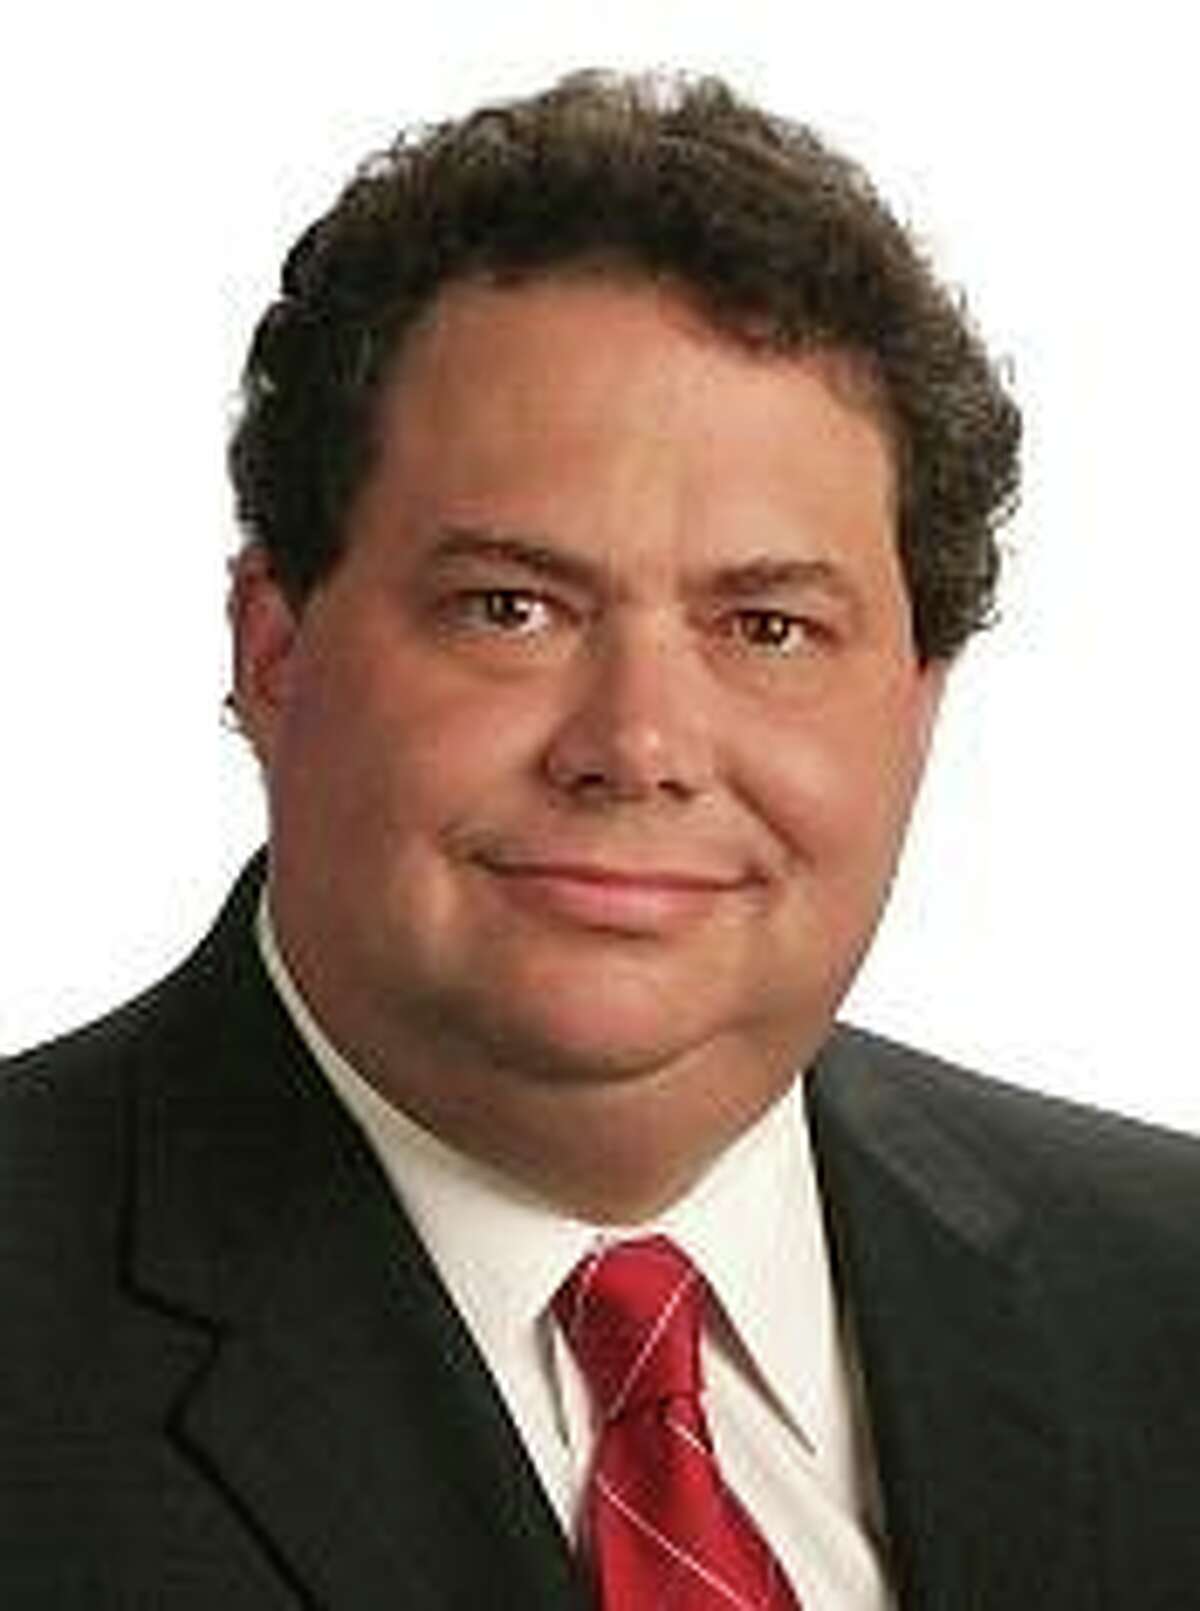 Rep. Blake Farenthold, R-Corpus Christi, is under fire in an ongoing sexual harassment probe.